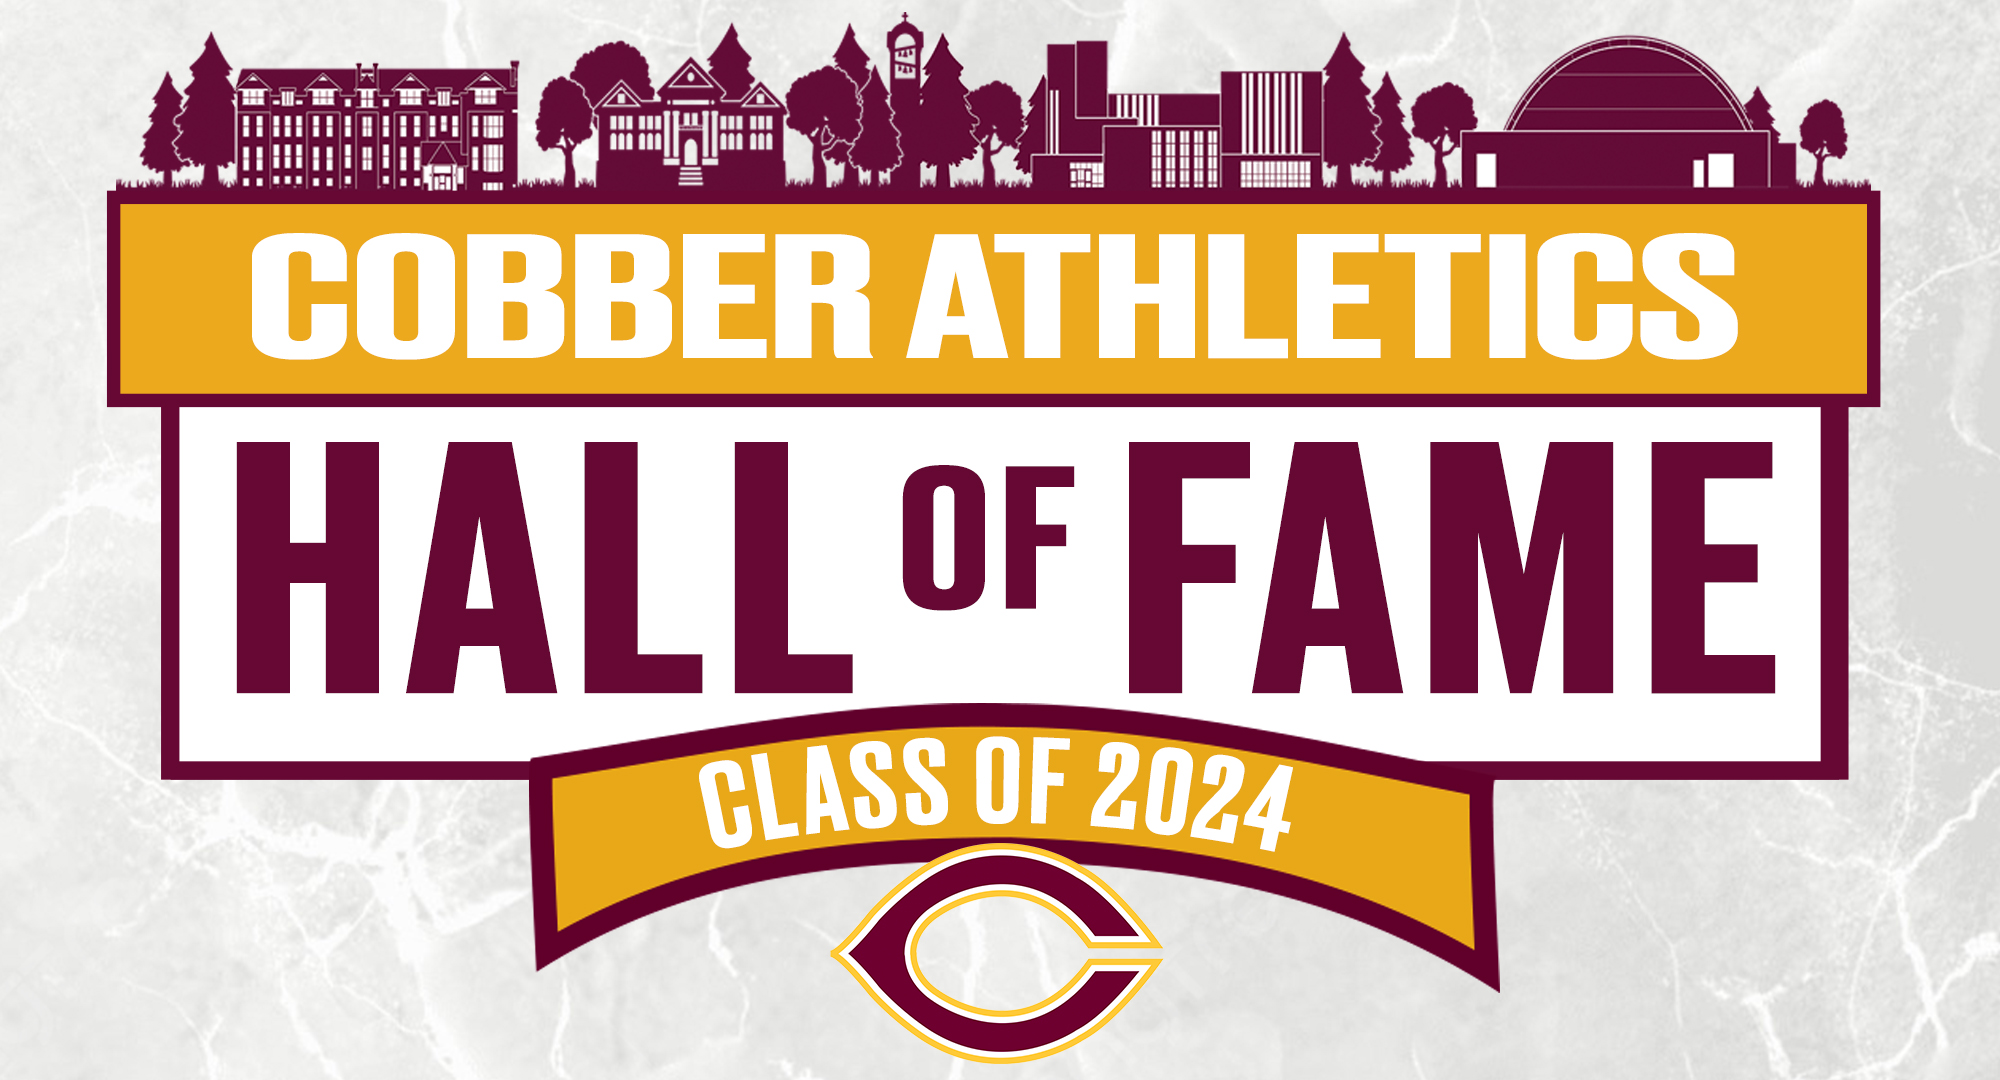 Athletic Director Rachel Bergeson announced the 2024 Cobber Athletics Hall of Fame Class.